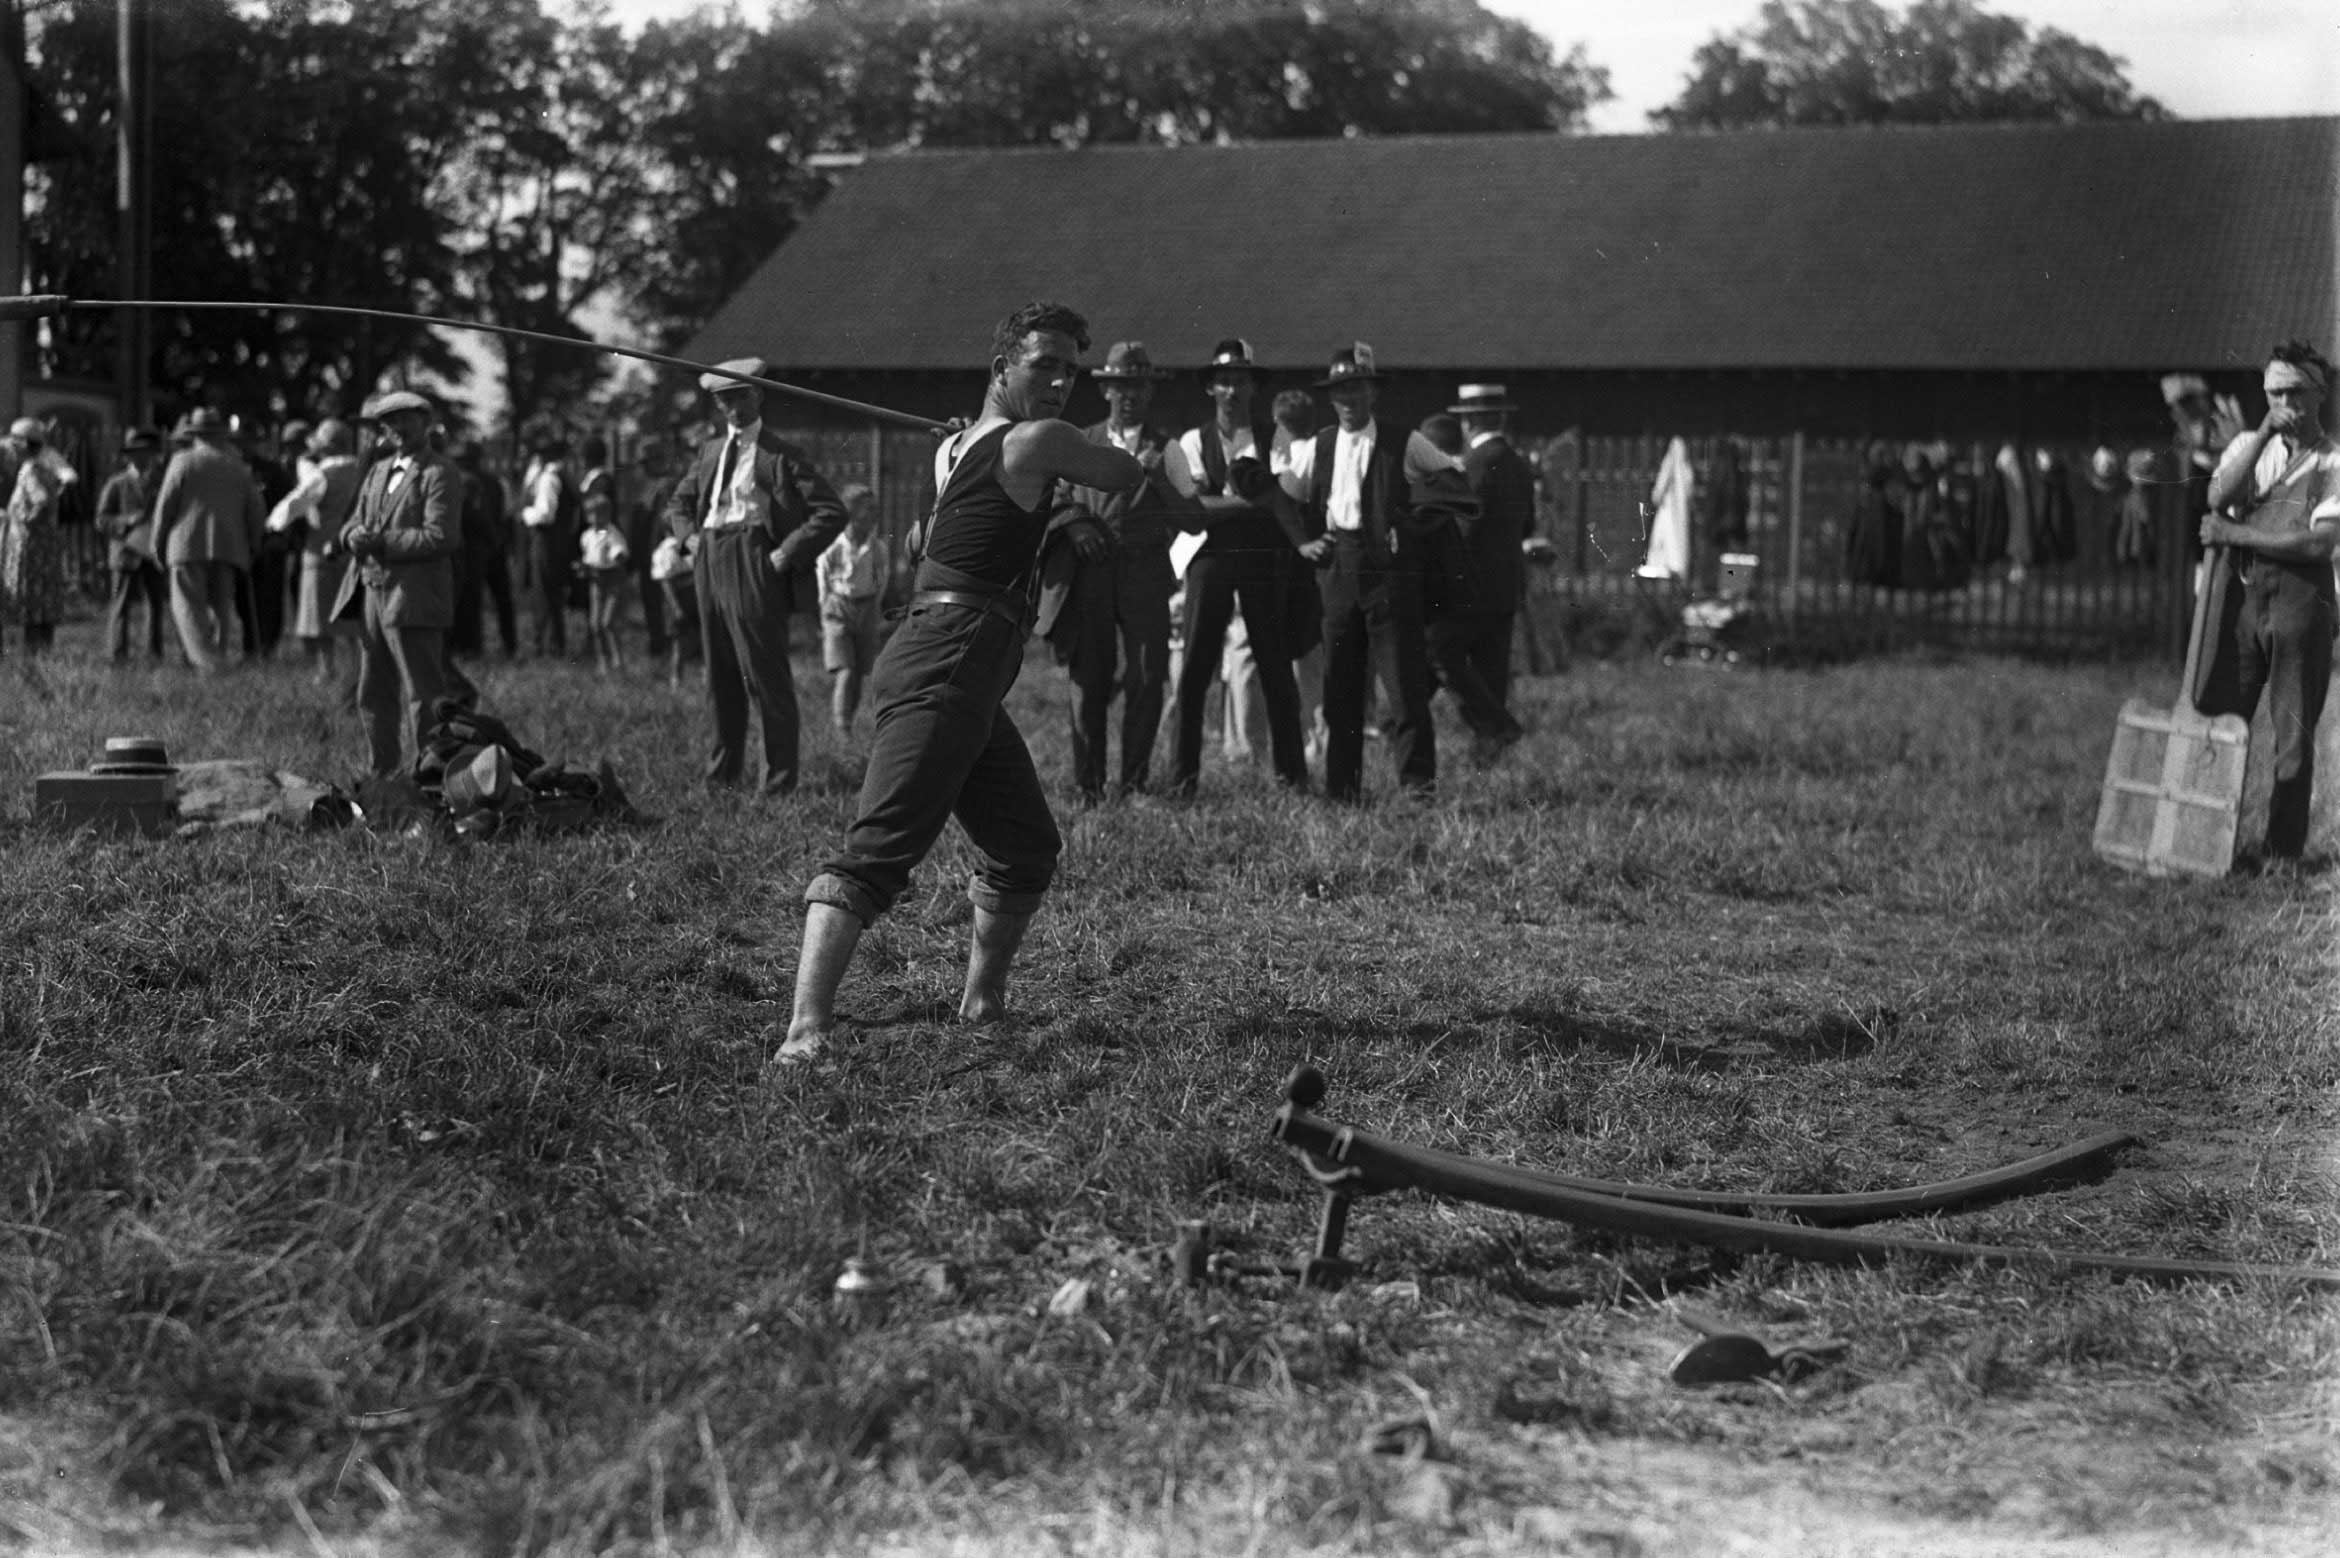 1930 Federal Hornussen Festival in Thun: A player taking his shot (photo by Carl Jost) © Carl Jost/Staatsarchiv Bern